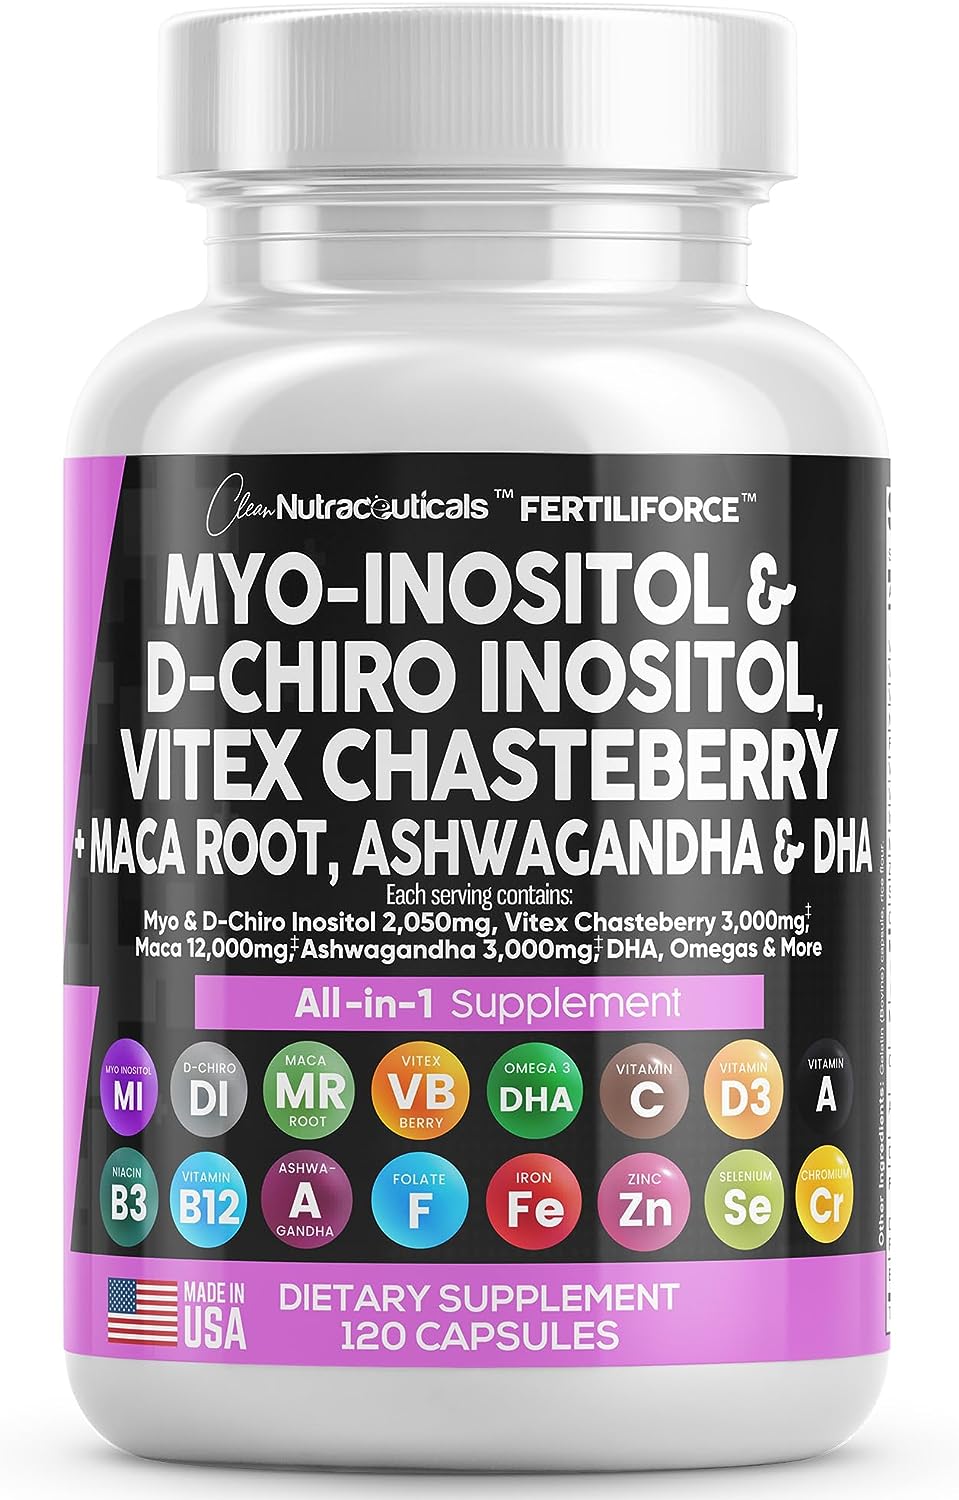 Fertility Prenatal Vitamins for Women Trying to Conceive, Support Healthy  Cycles, Helps Fertility - Vitex (Chaste Berry), PABA, Folate Folic Acid